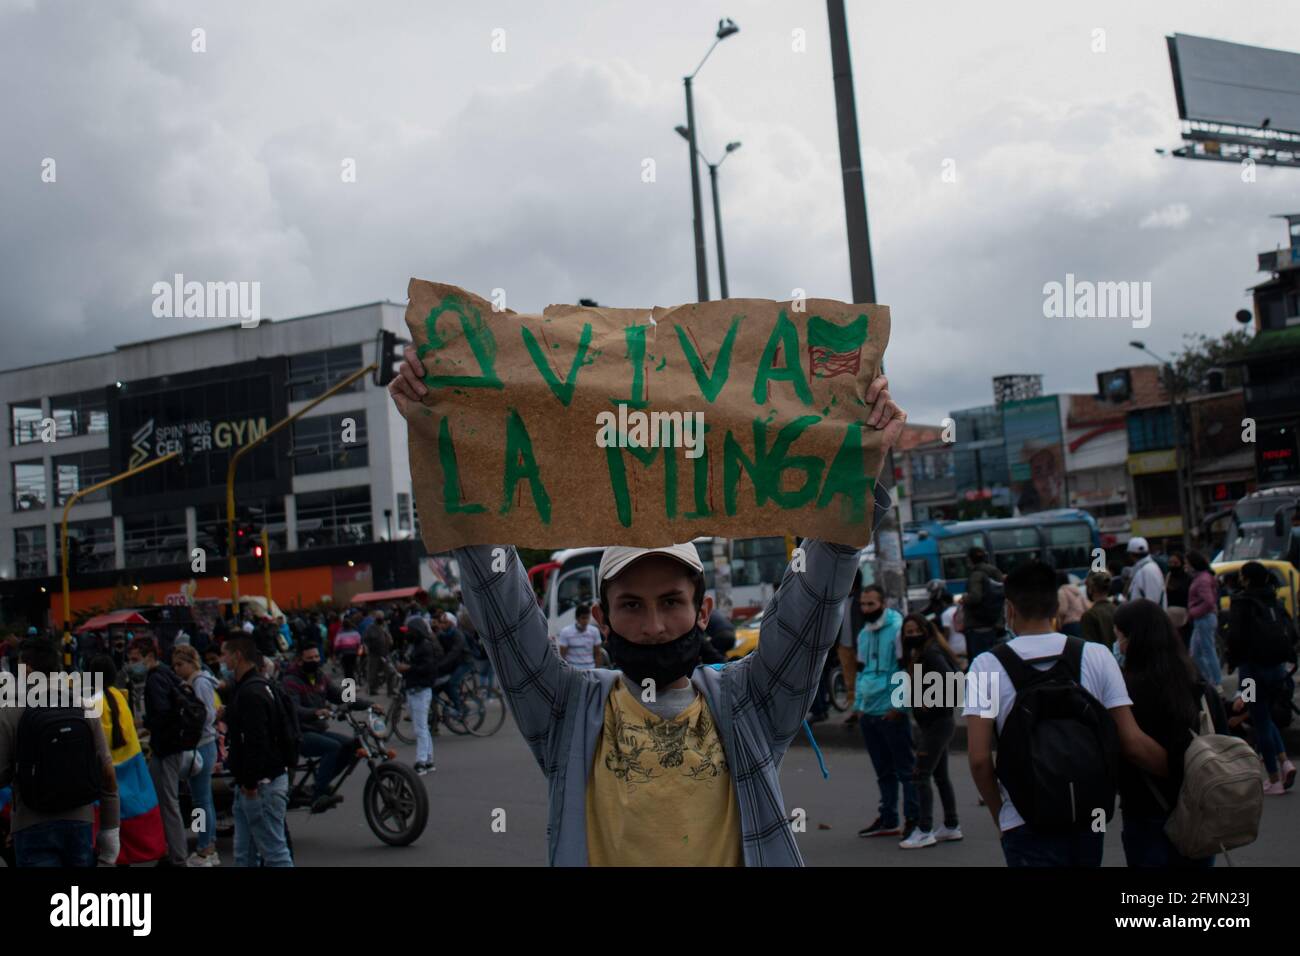 Bogota, Colombia, May 10, 2021, A demonstrator holds a sign in support of the MINGA Indigena movement, that was attacked by armed people in Cali during the weekend as Bogota faces its 13 day of anti-government protests against the Health Reform and Police Brutality cases that rise to over 30 dead across the country since the National Strike begun. In Bogota, Colombia on May 10, 2021 Stock Photo